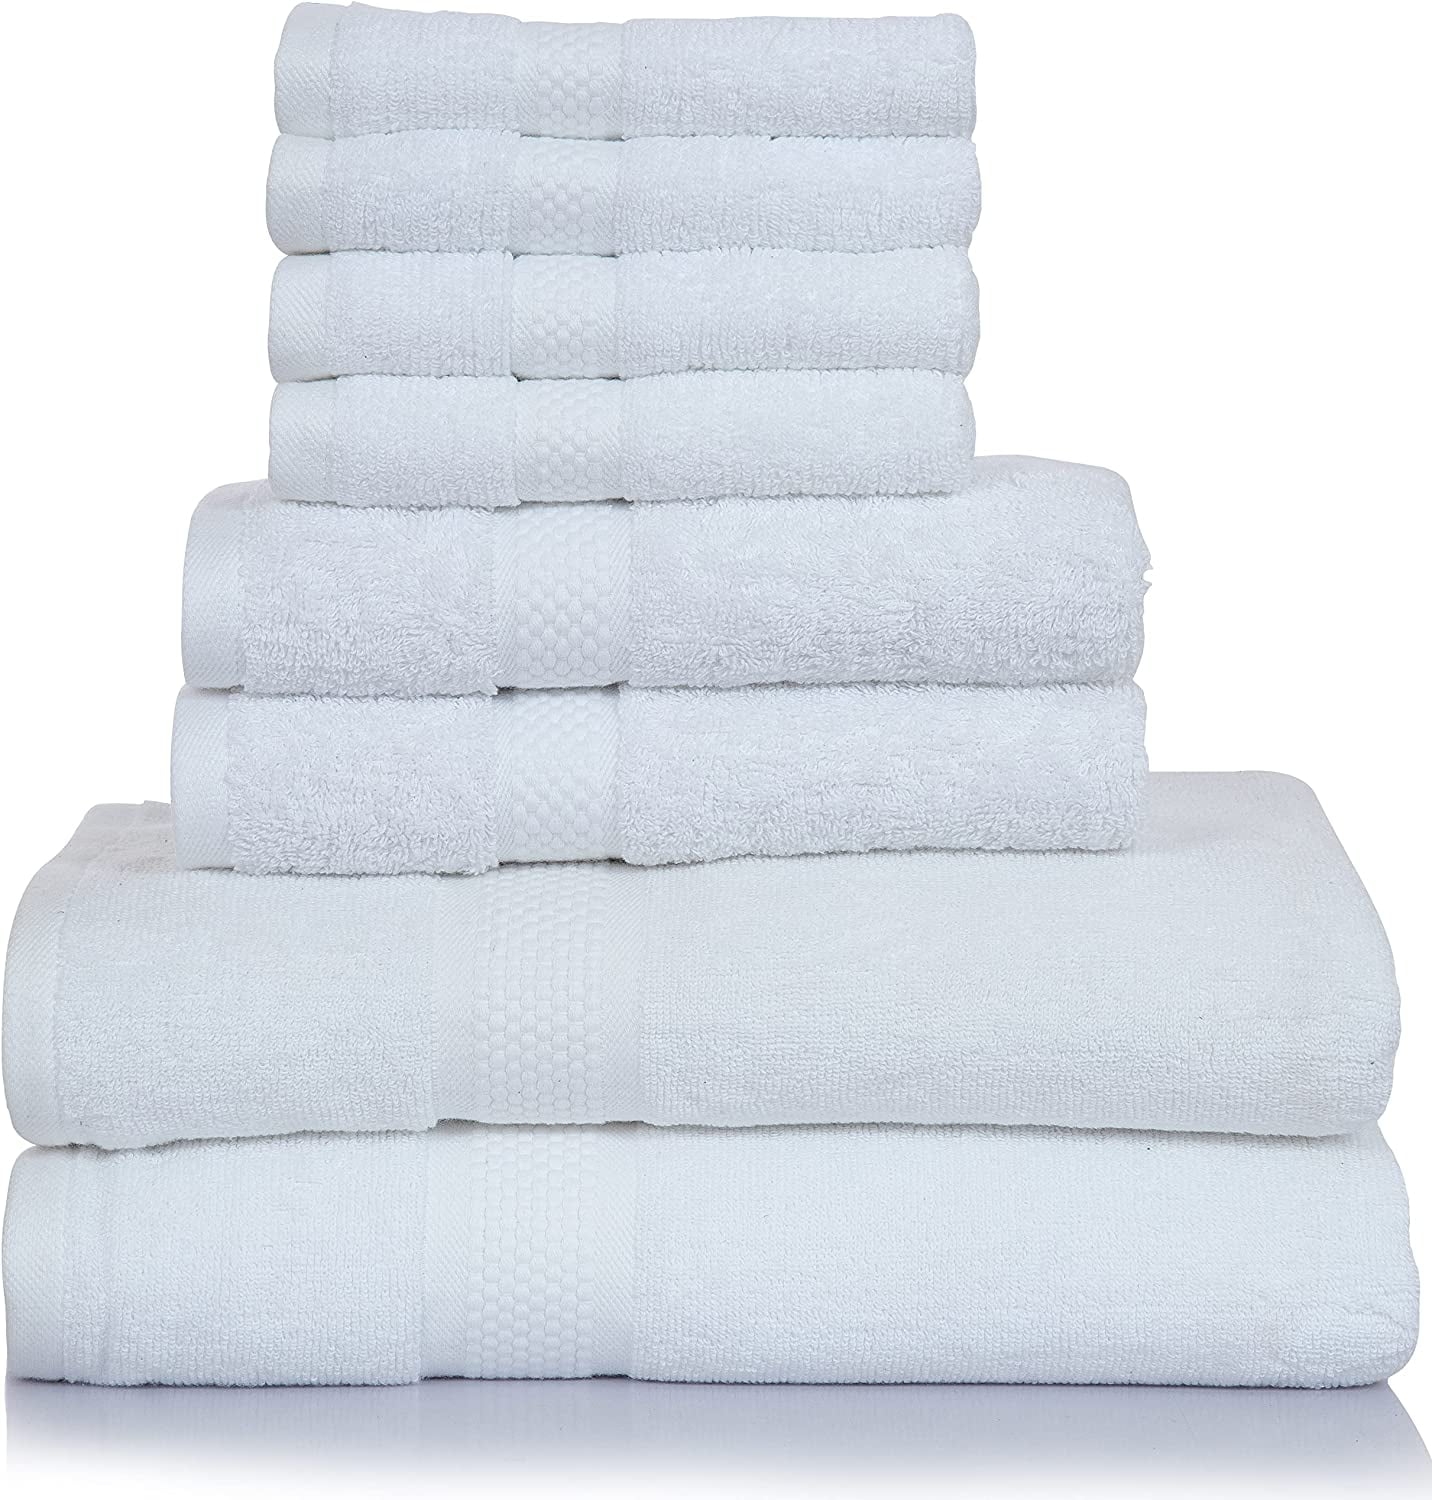 Pack of Towels Bath K25 Bath Towel Towels 3 Piece Towel Set 1 Bath Towels 2 Hand Towels 600 GSM Ring Spun Cotton Highly Absorbent Towels for Pretty